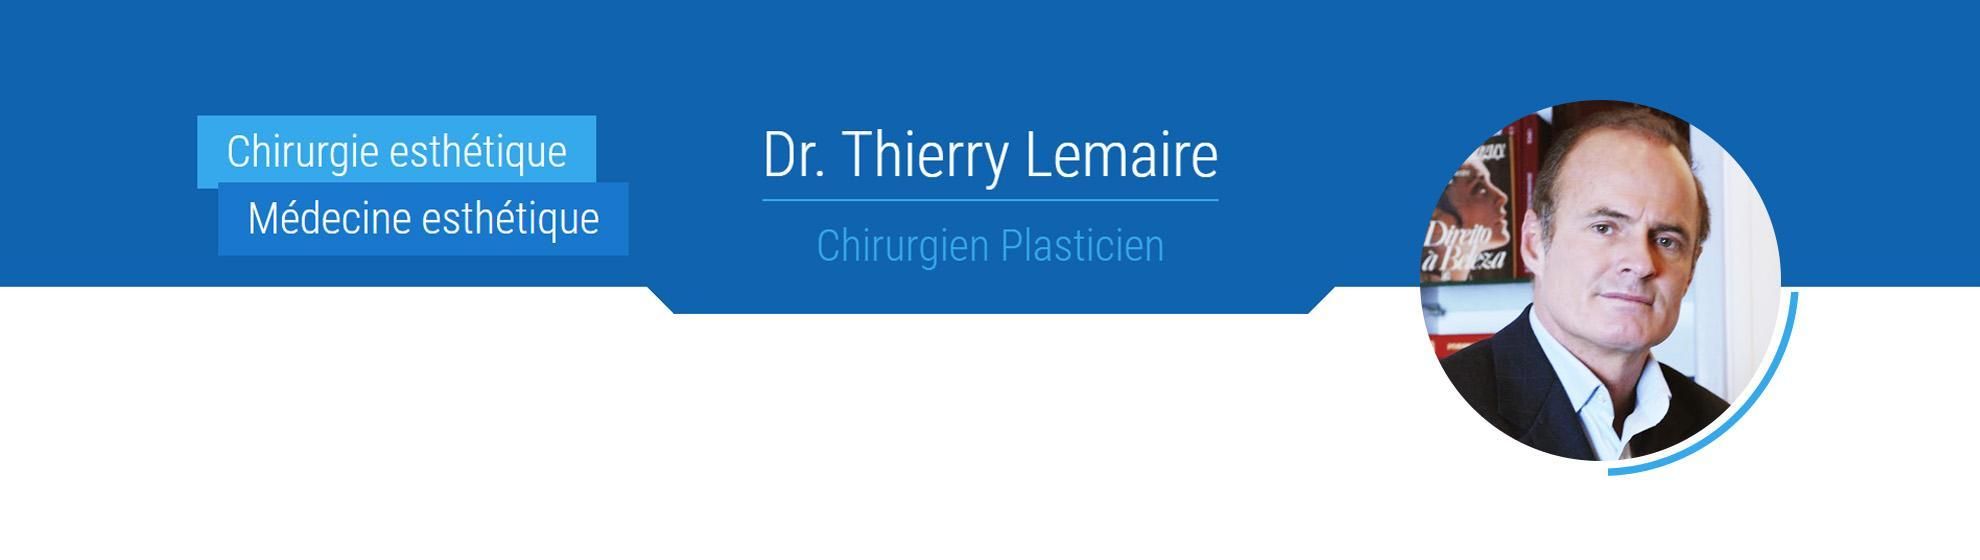 Dr Thierry Lemaire